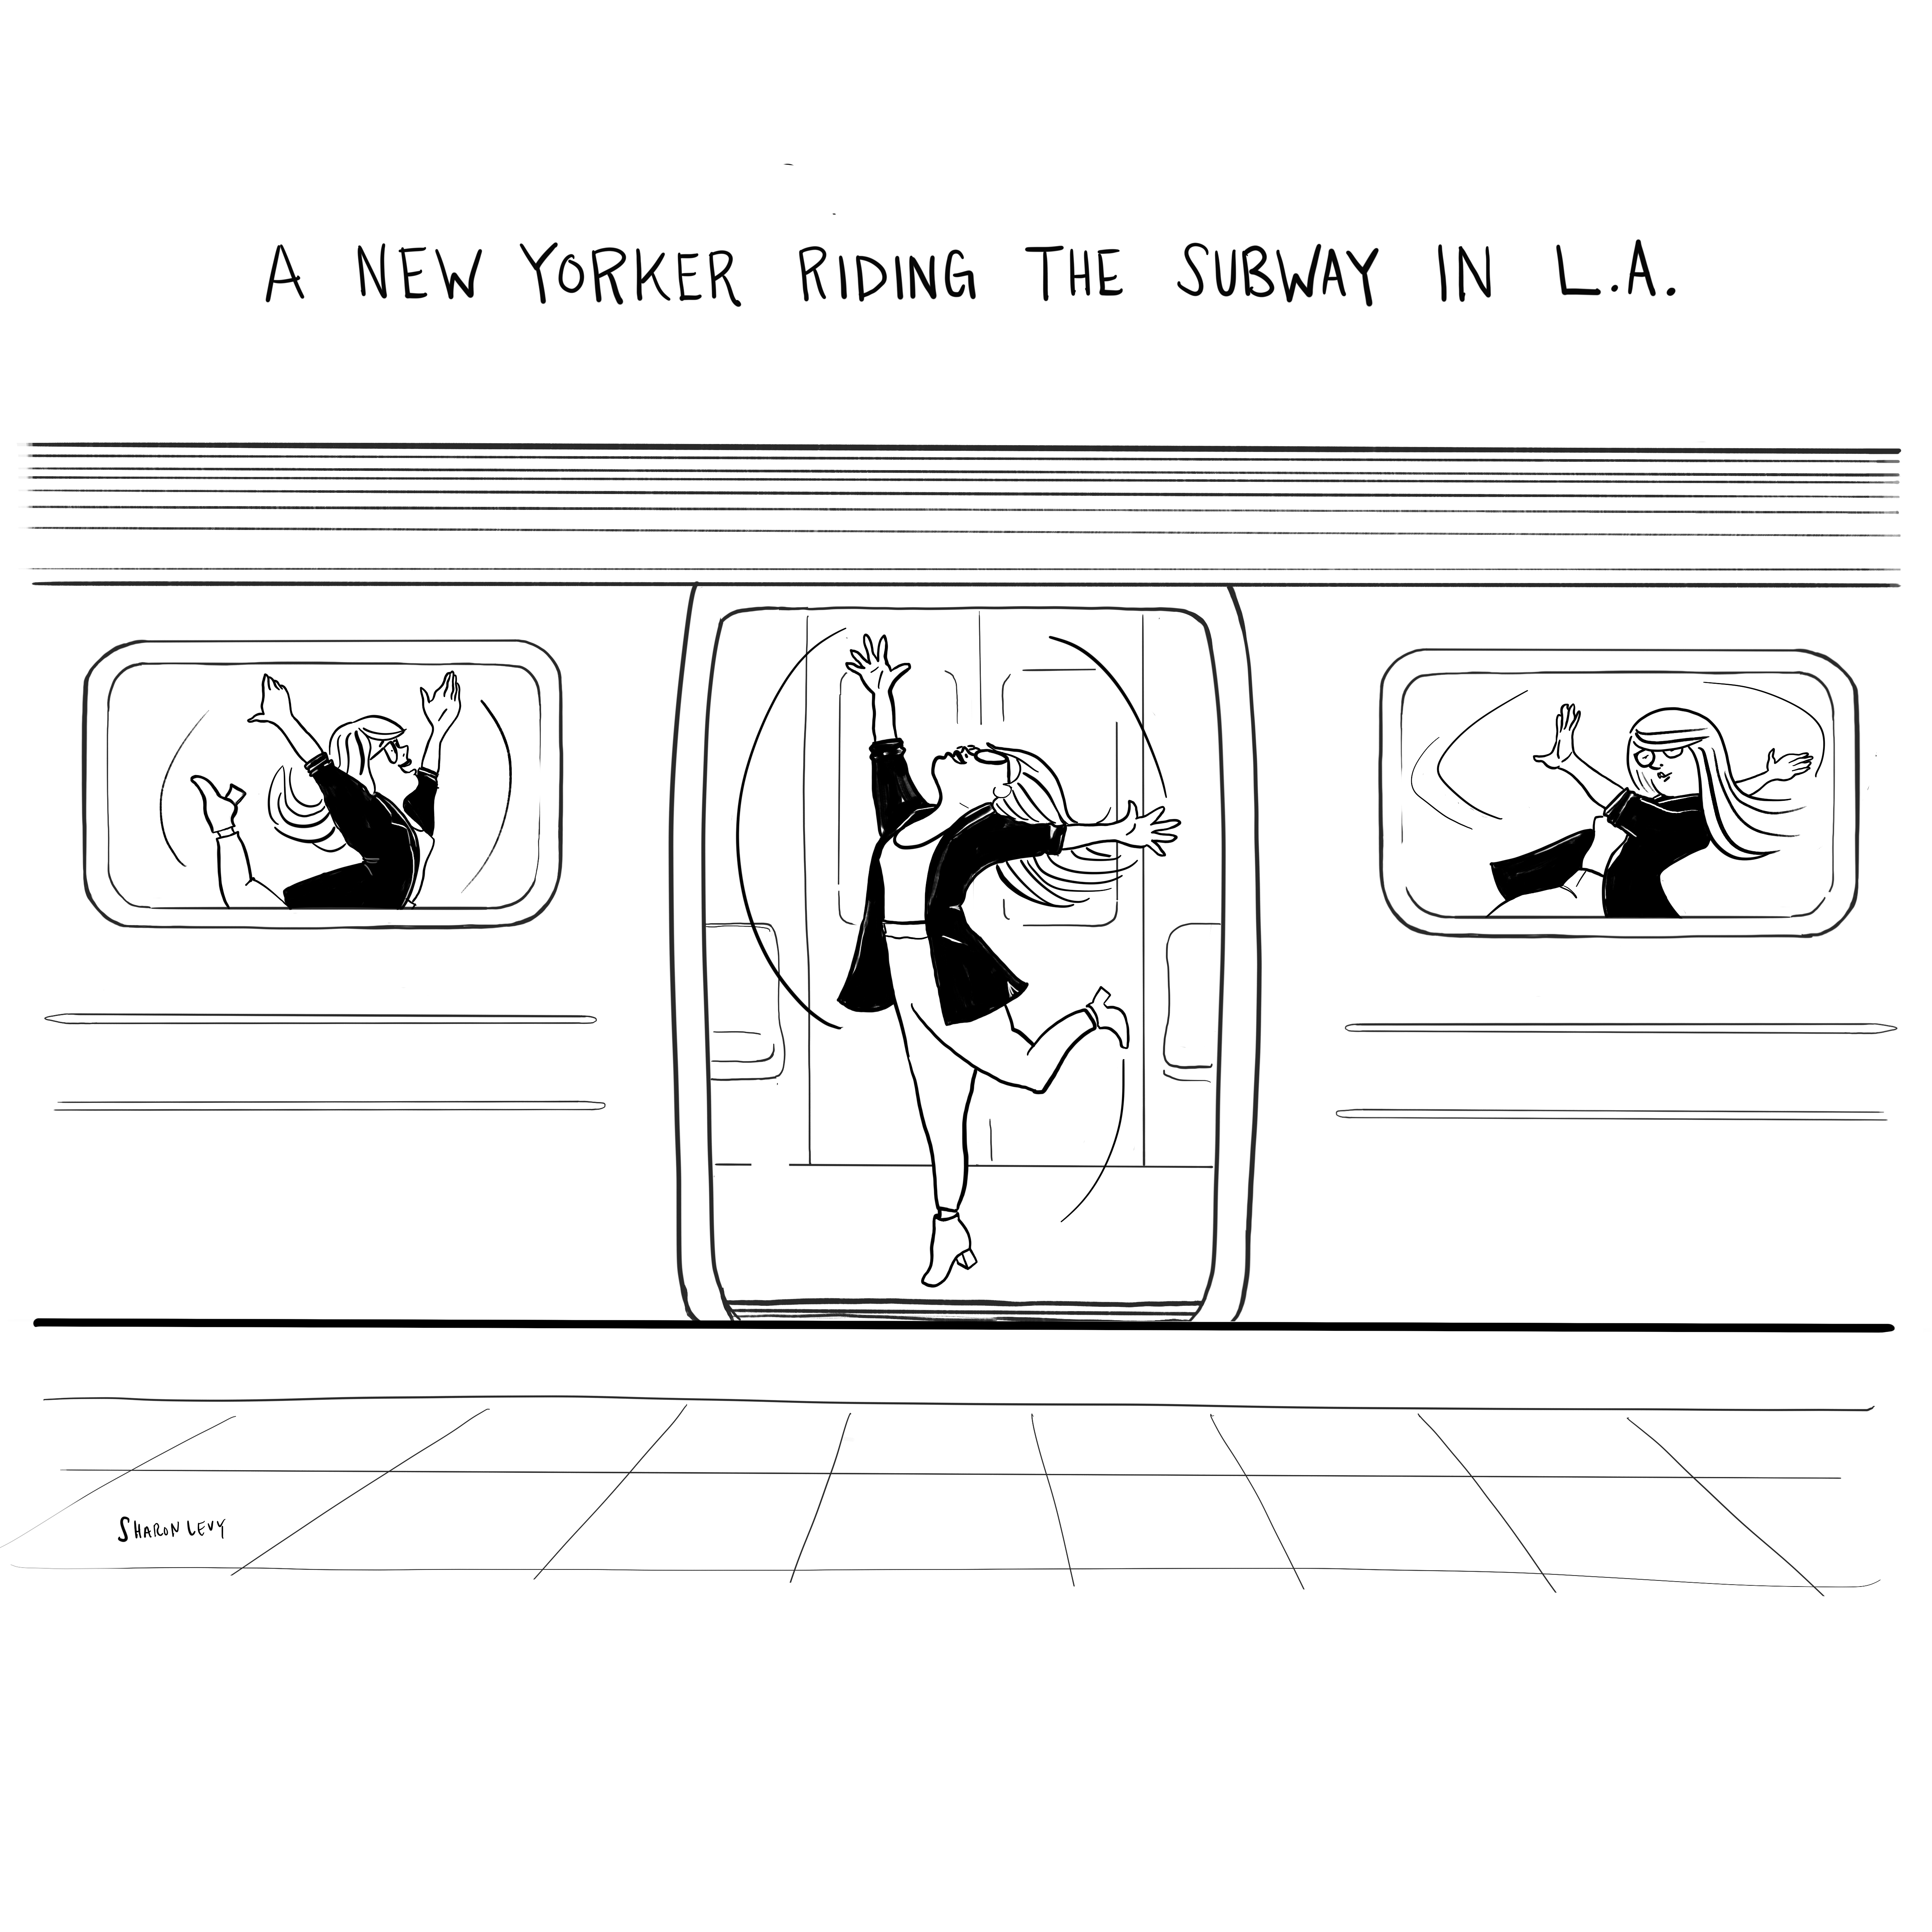 The New Yorker Cartoons, print and online